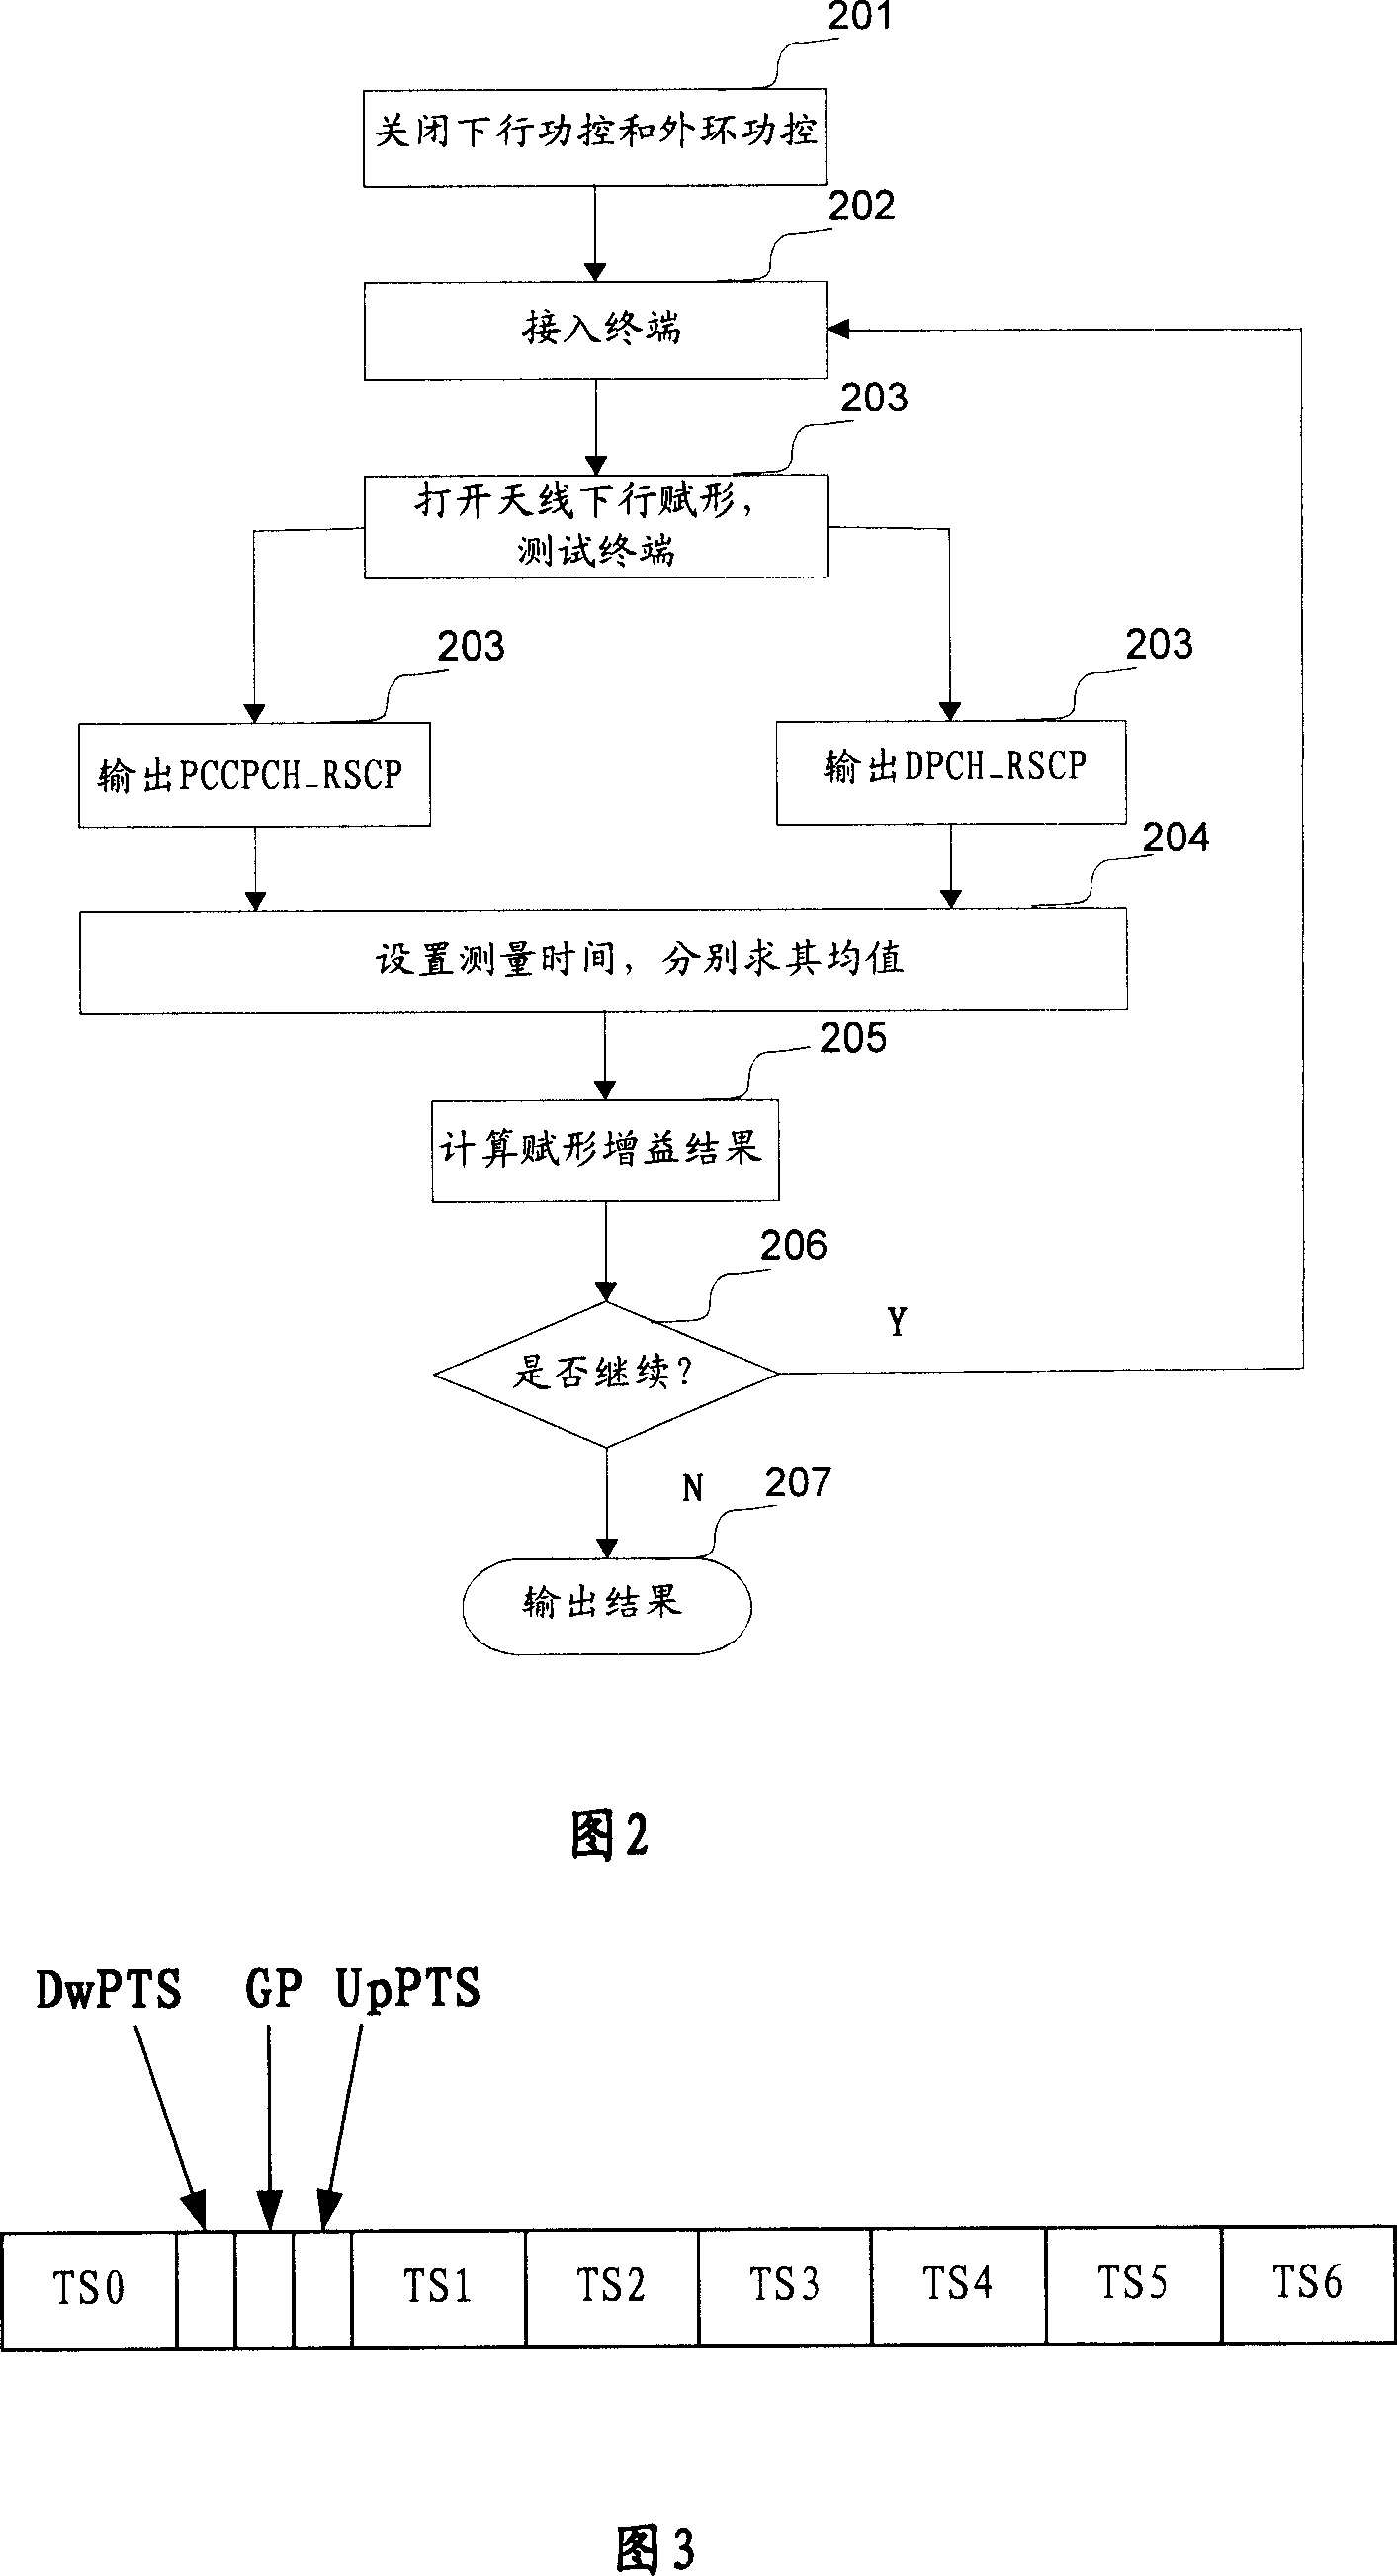 Method and apparatus for testing downlink forming gain of time-division synchronous code division multiple access TD-SCDMA intelligent antenna